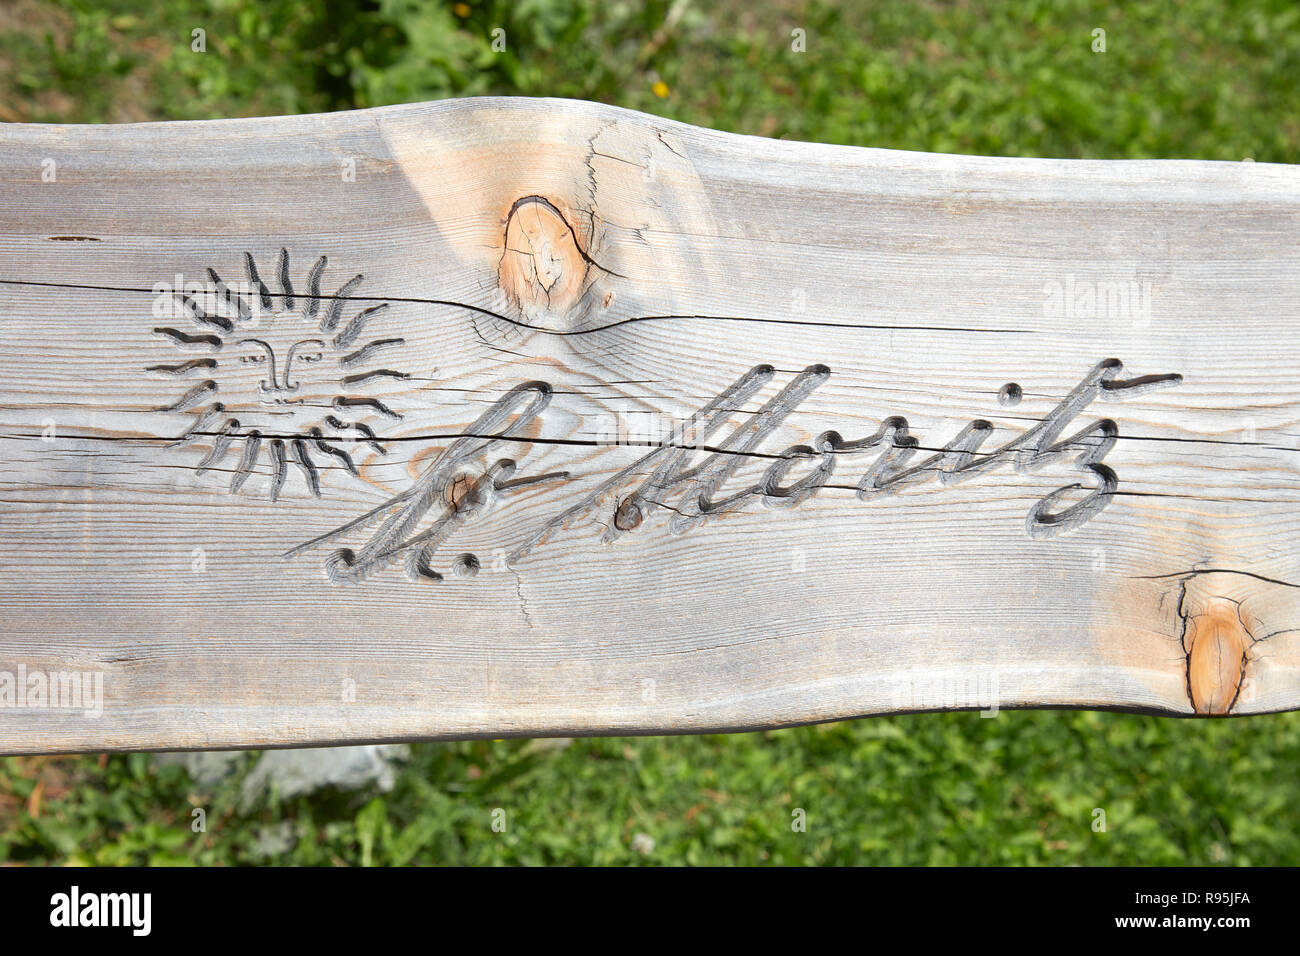 SANKT MORITZ, SWITZERLAND - AUGUST 16, 2018: City logo with sun carved in wooden bench plank in a sunny summer day in Sankt Moritz, Switzerland Stock Photo